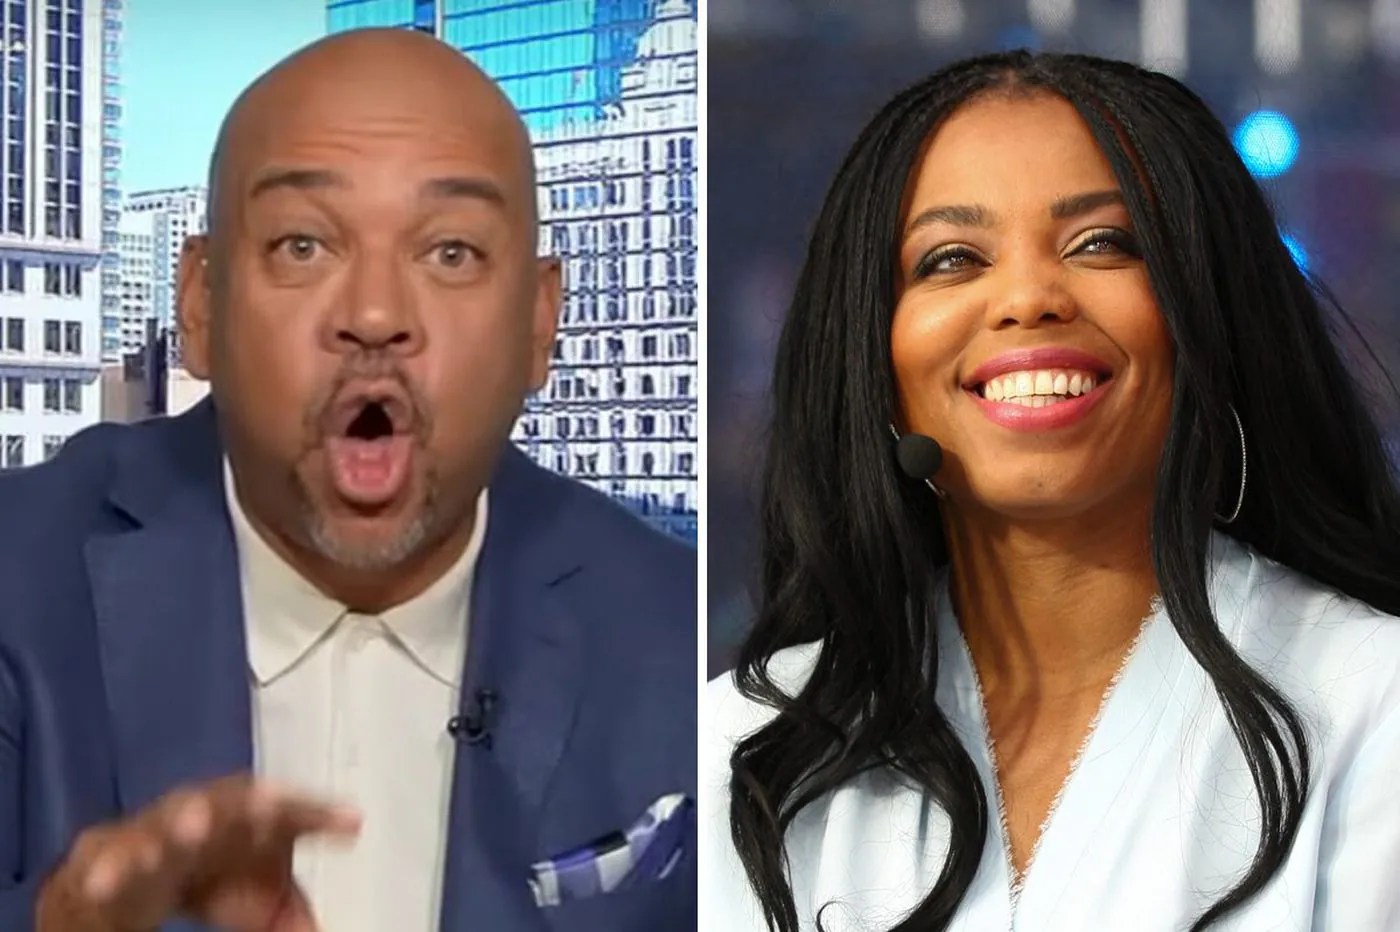 Michael Wilbon rips ESPN, Jemele Hill opens up about suspension